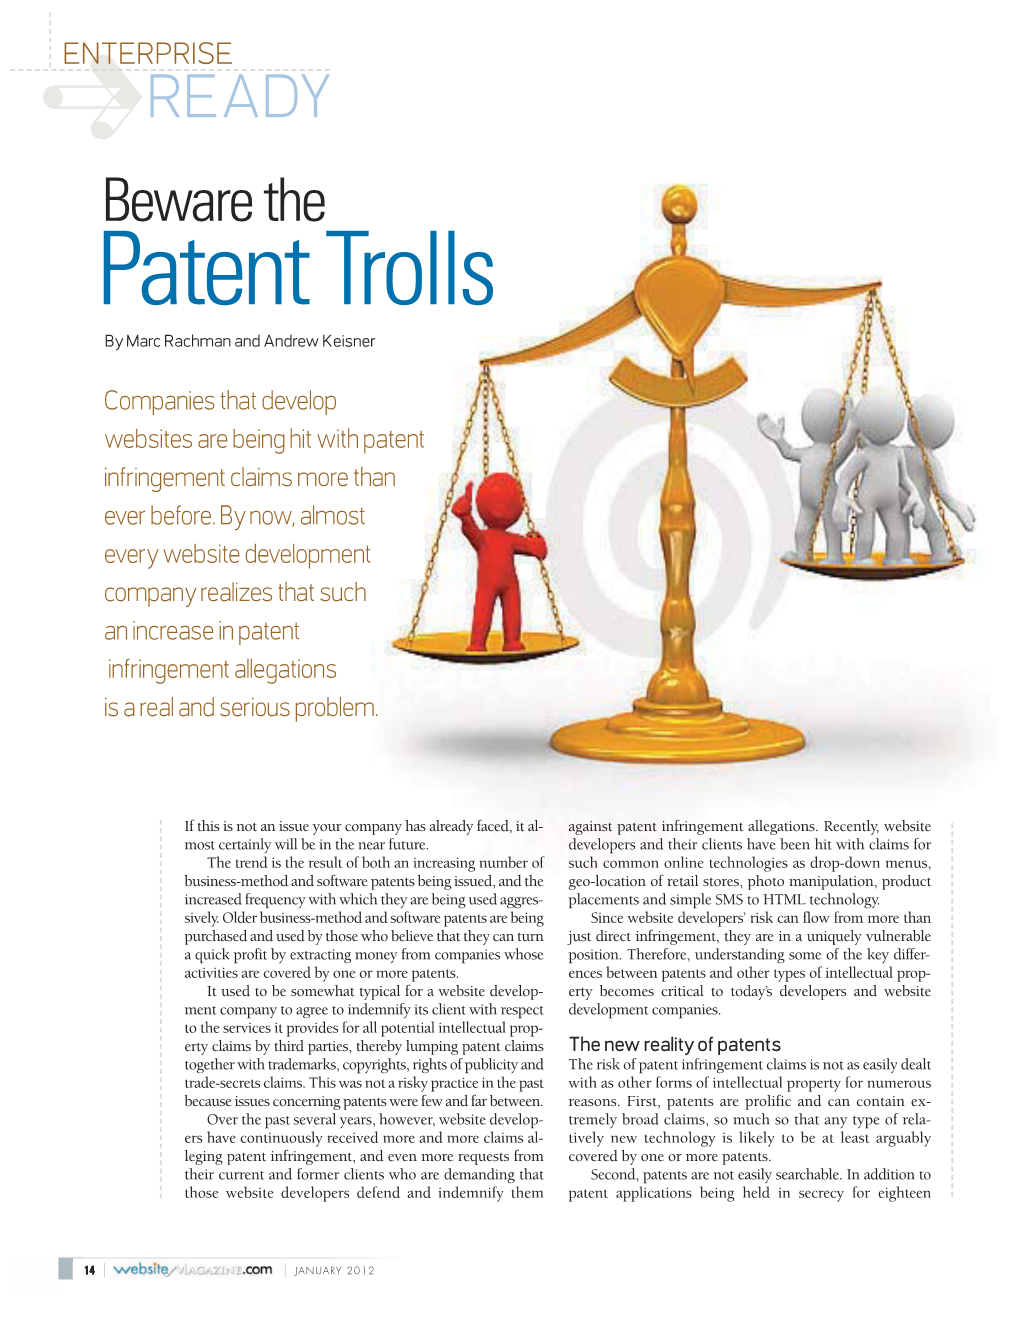 Beware the Patent Trolls by Marc Rachman and Andrew Keisner